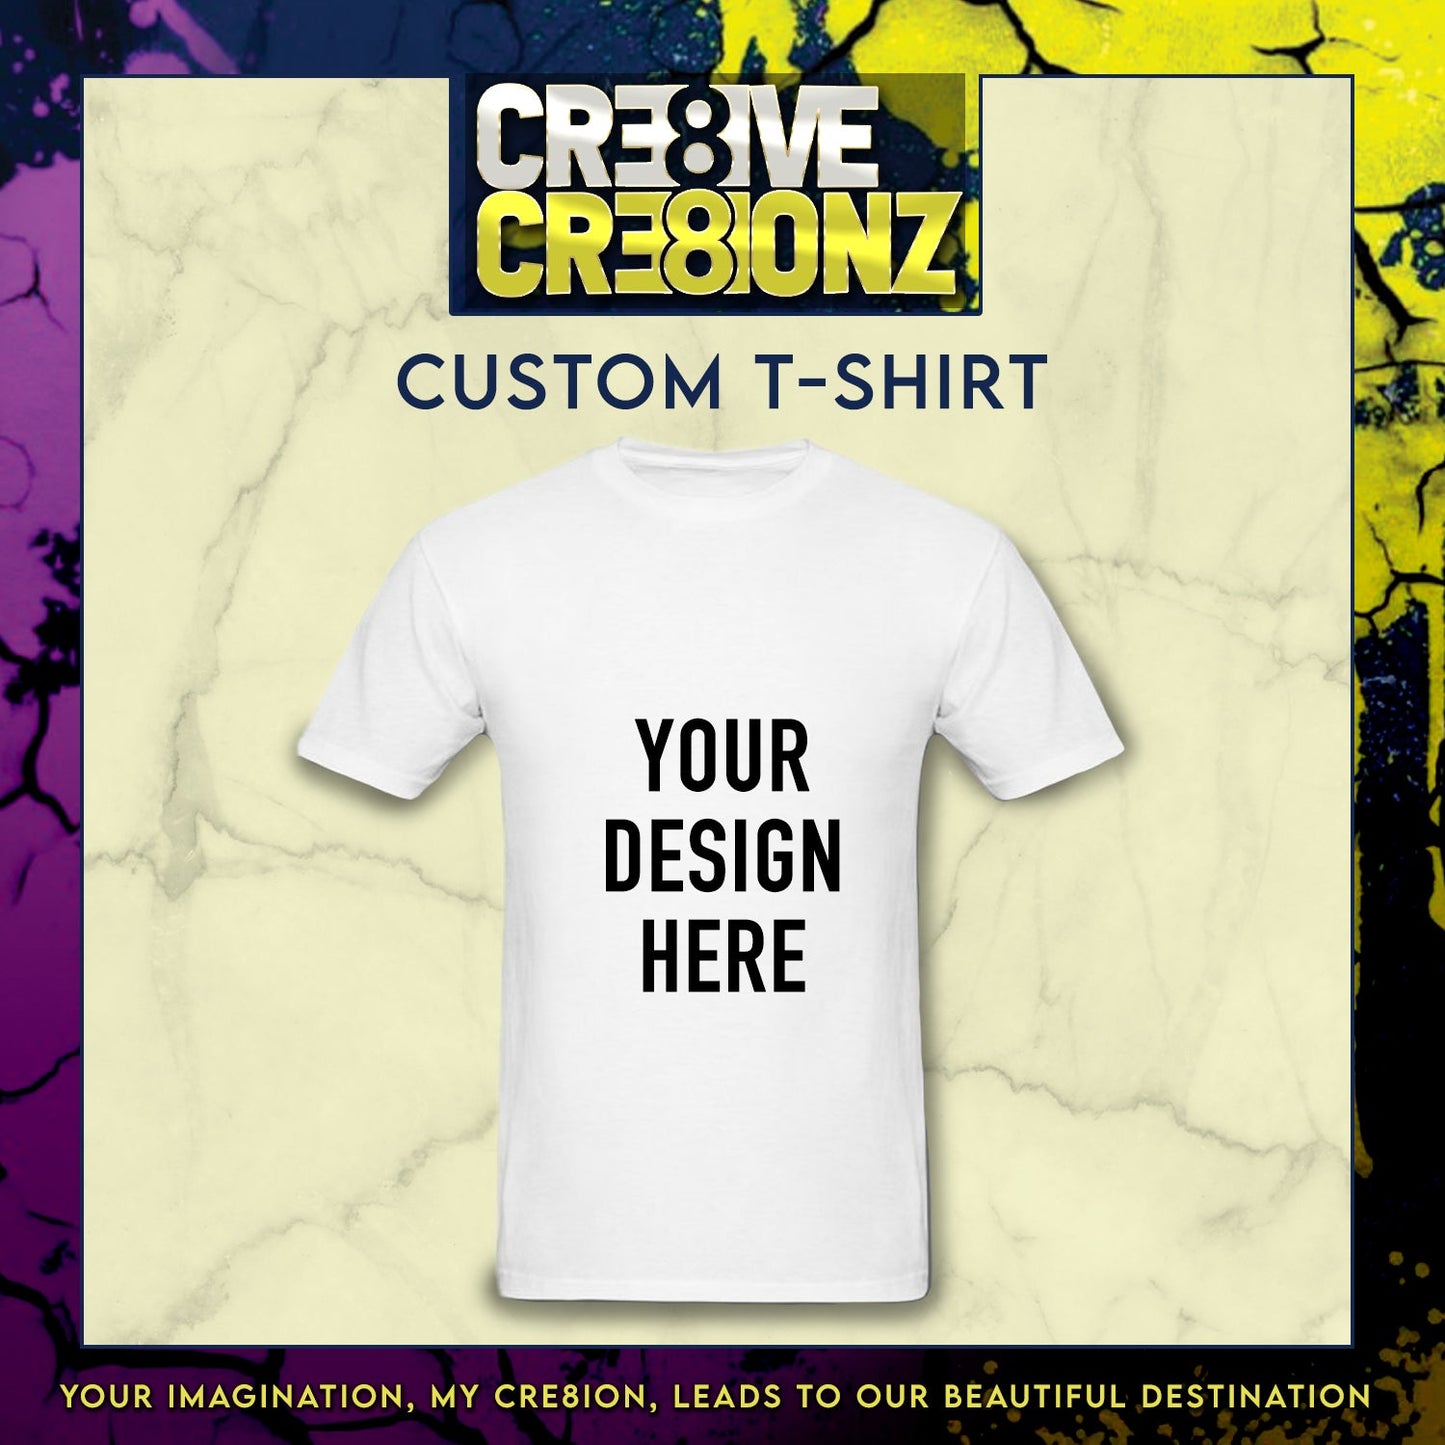 Custom T-Shirt - Cre8ive Cre8ionz